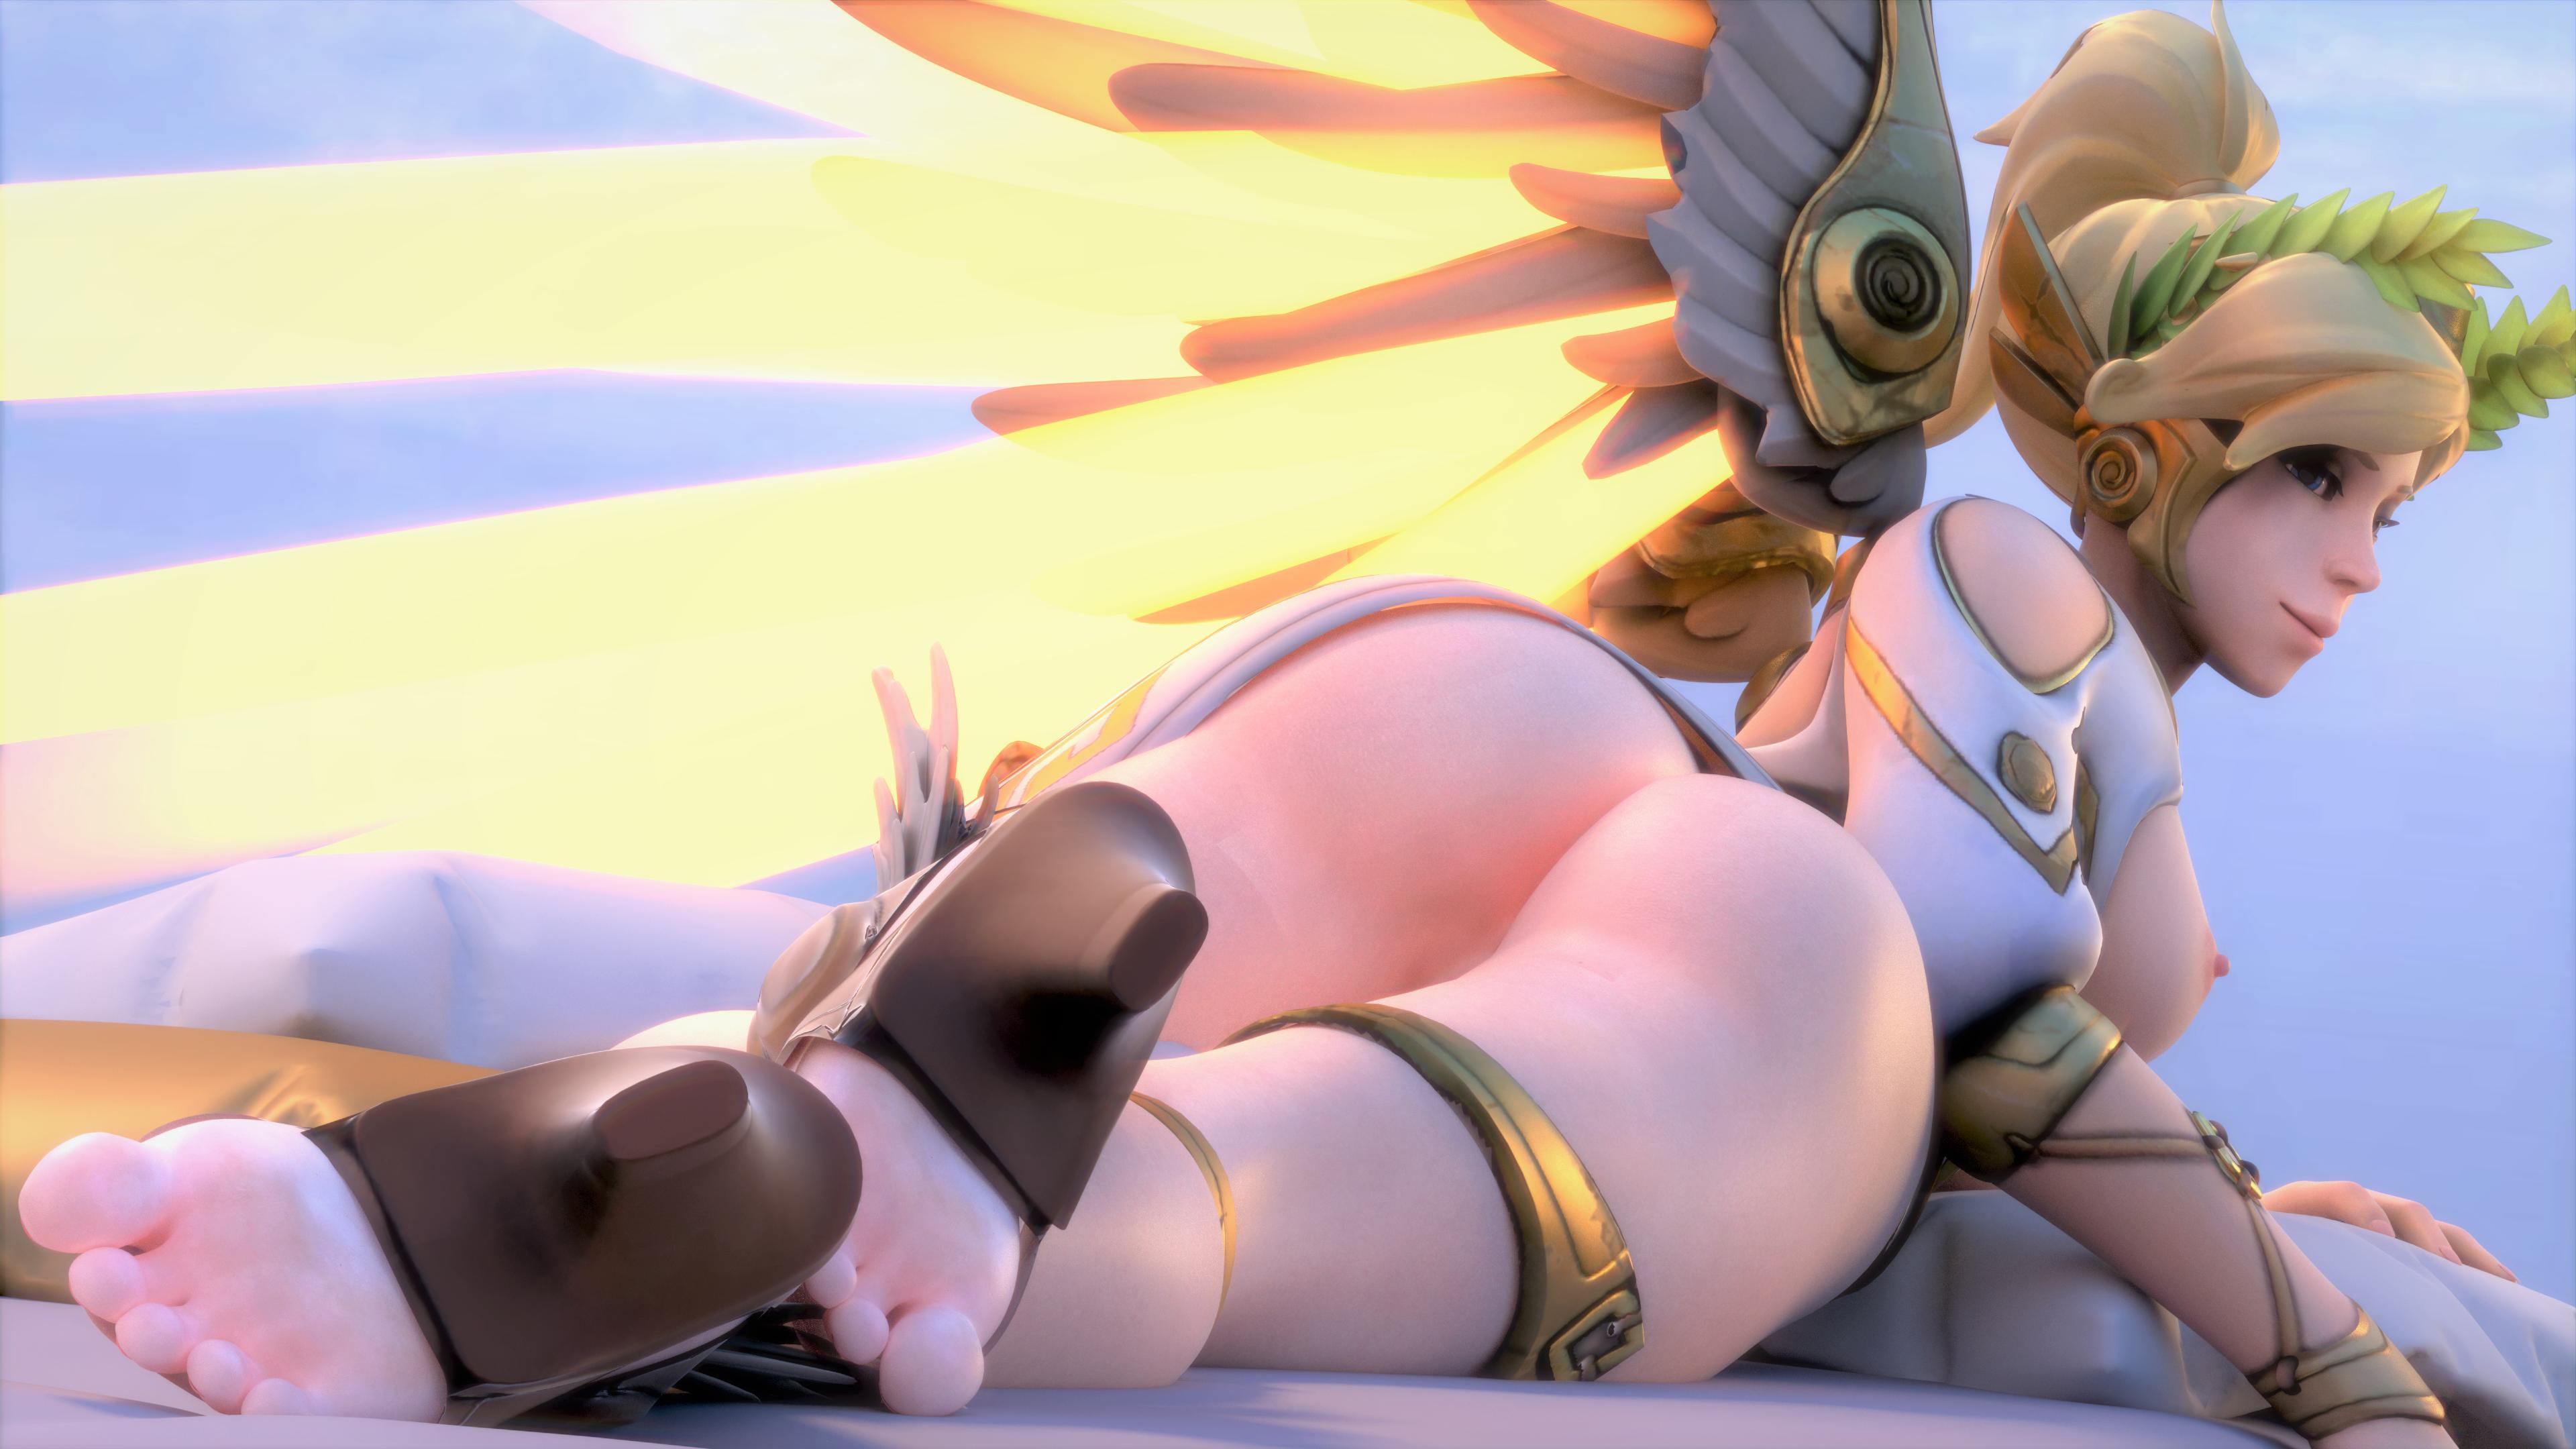 The K. reccomend mercy winged victory